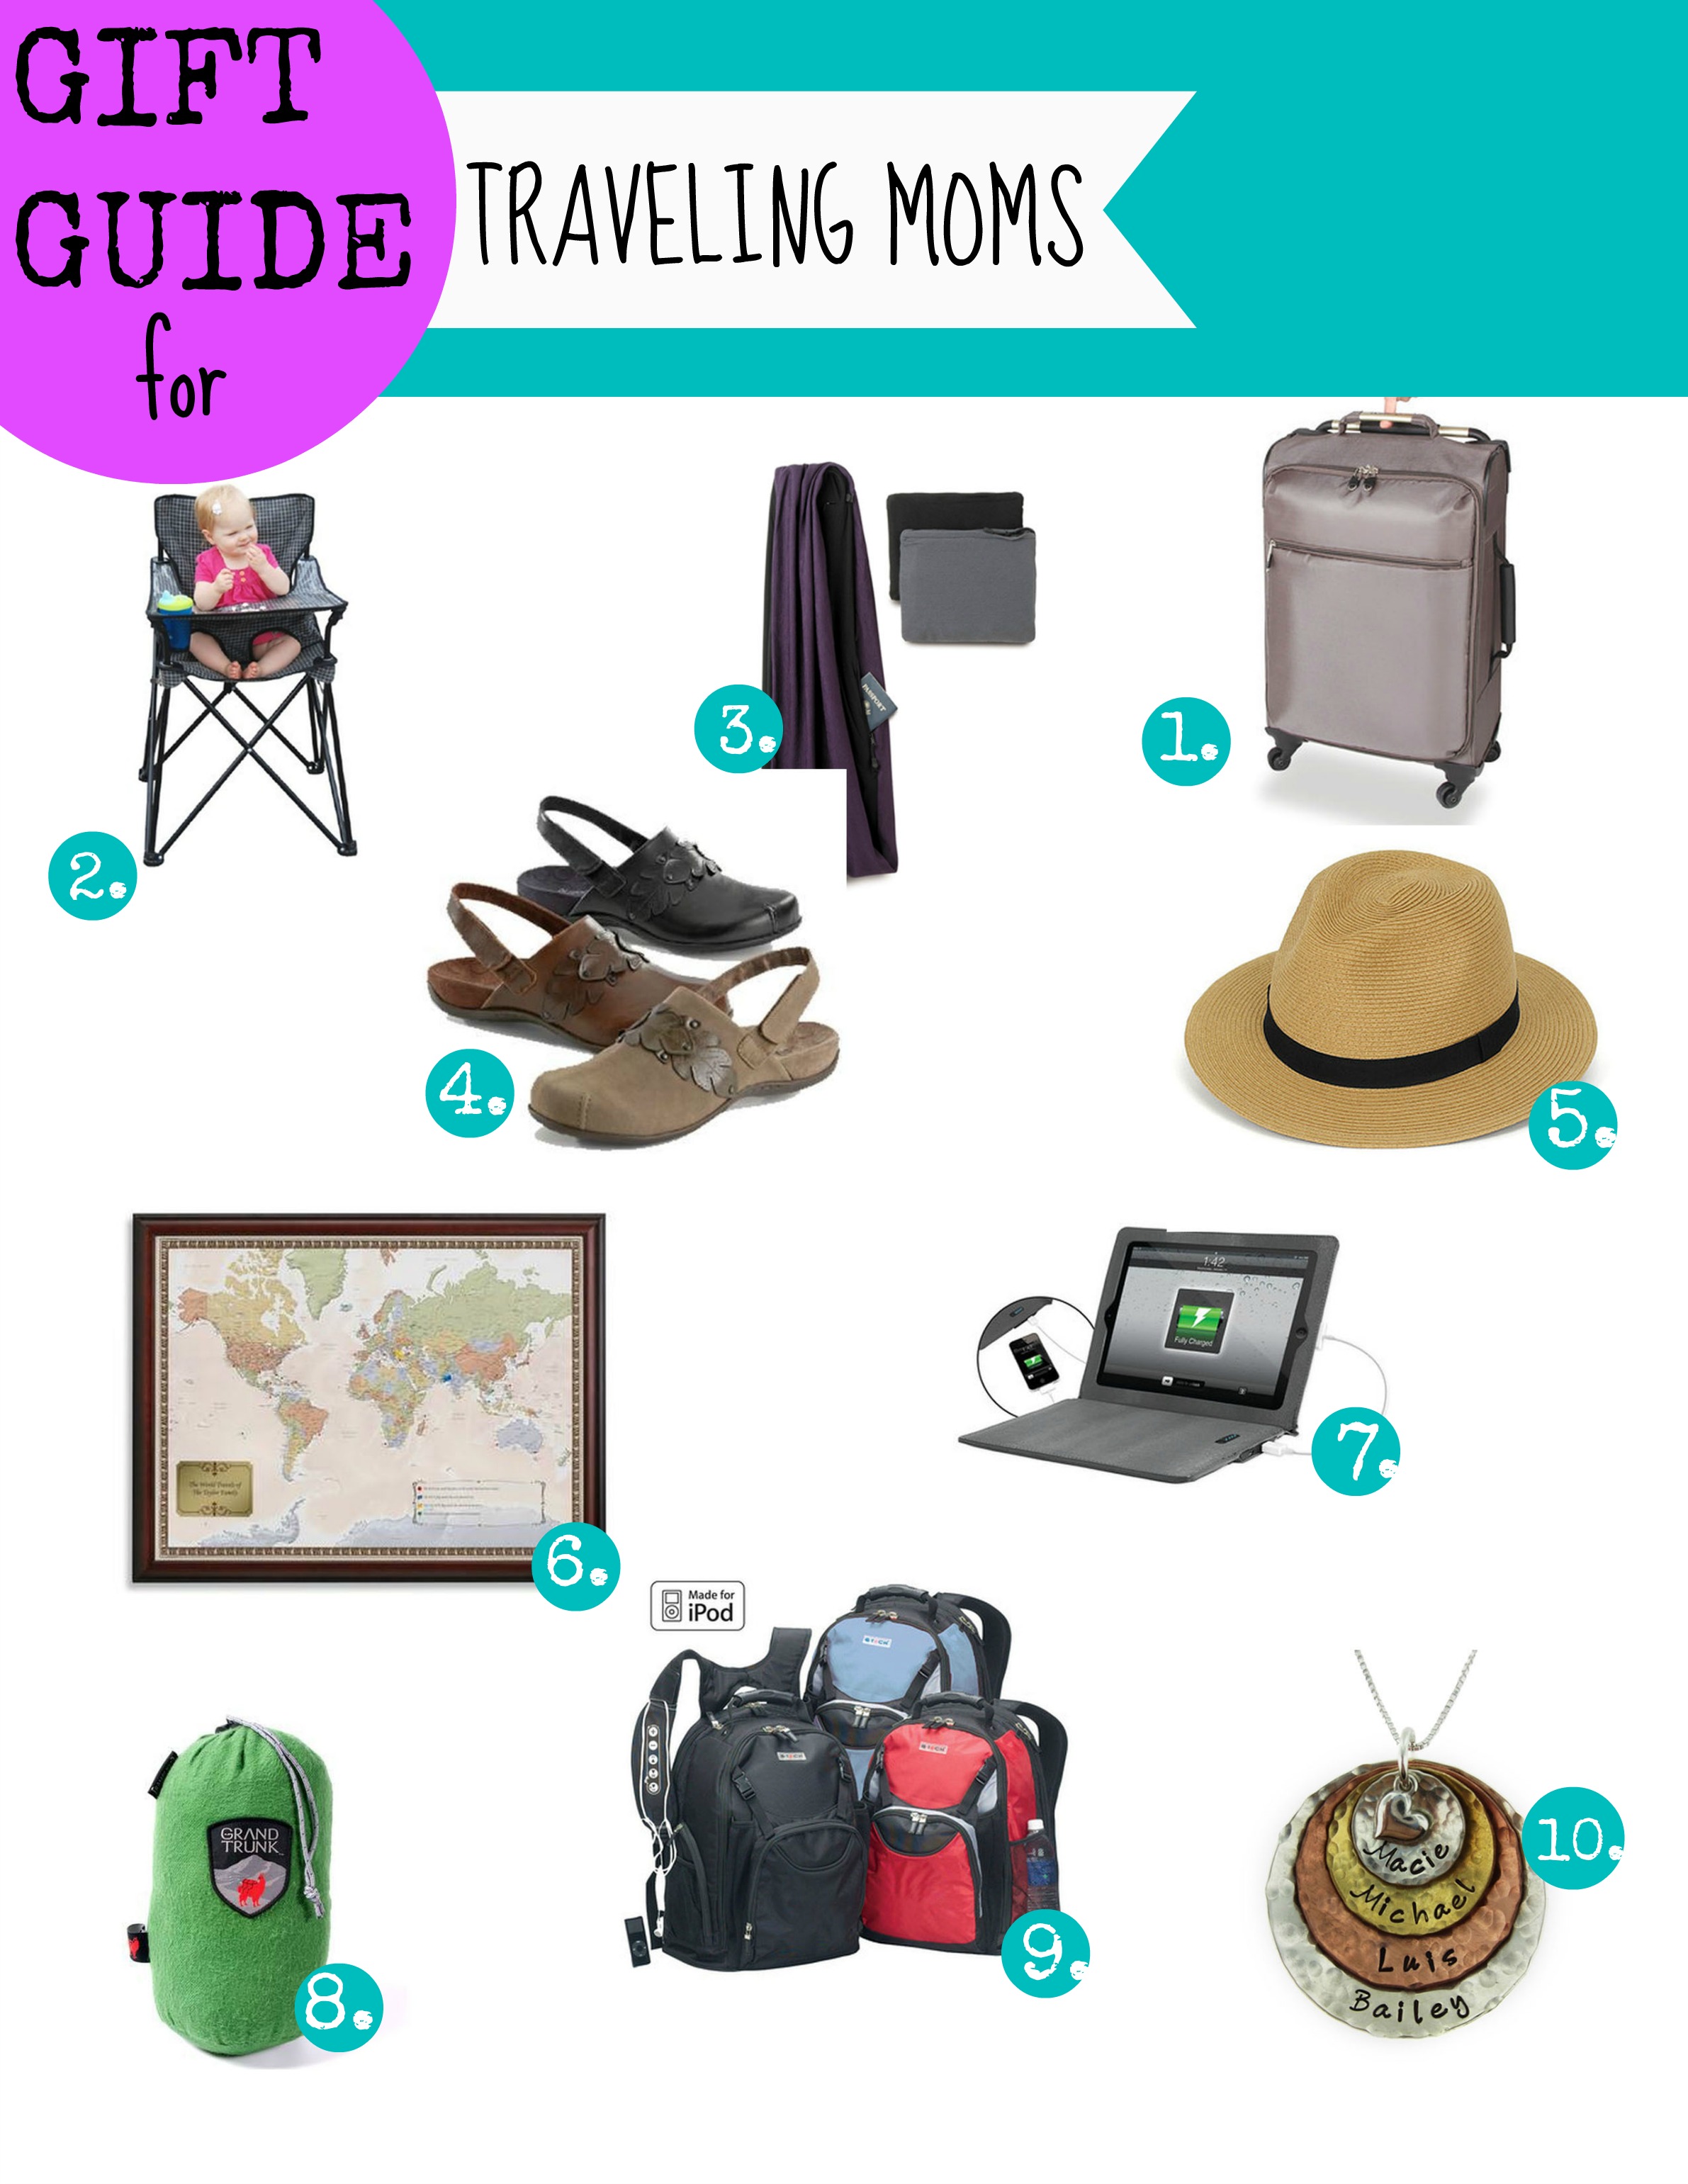 Mother’s Day Gift Guide for Traveling Moms: Travel Tips Tuesday